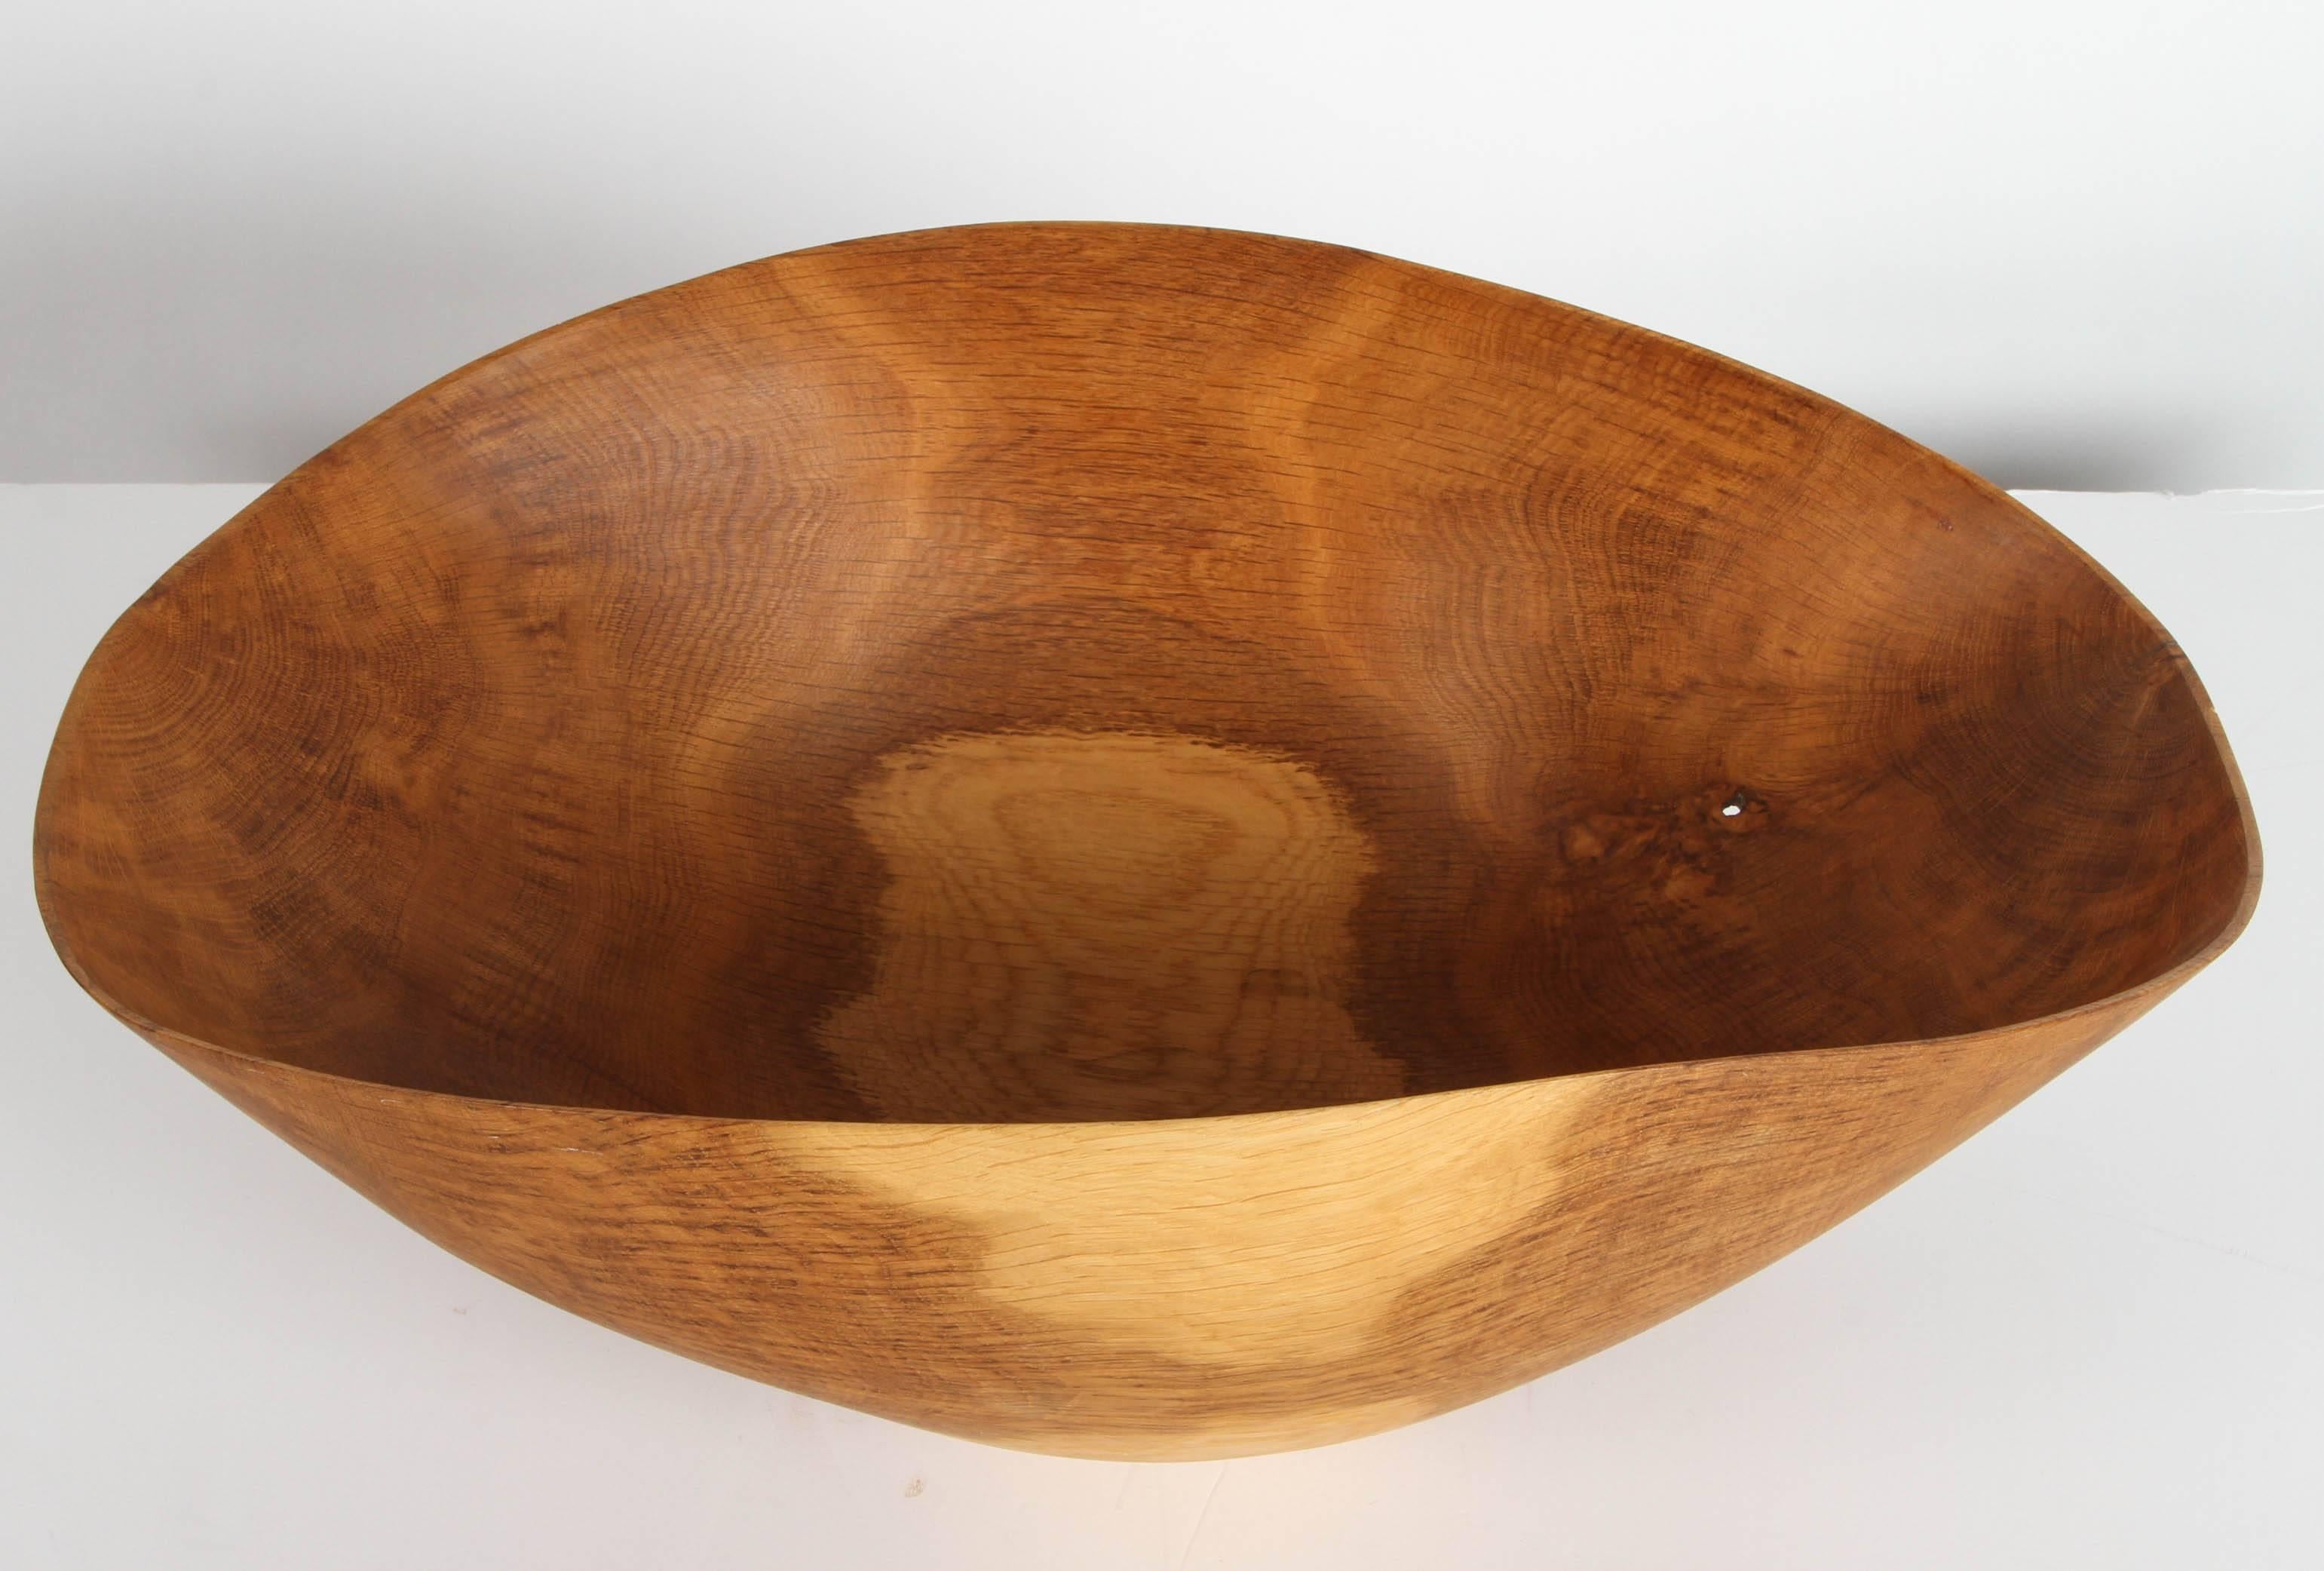 Signed and dated by Anthony Bryant turned wood bowl.